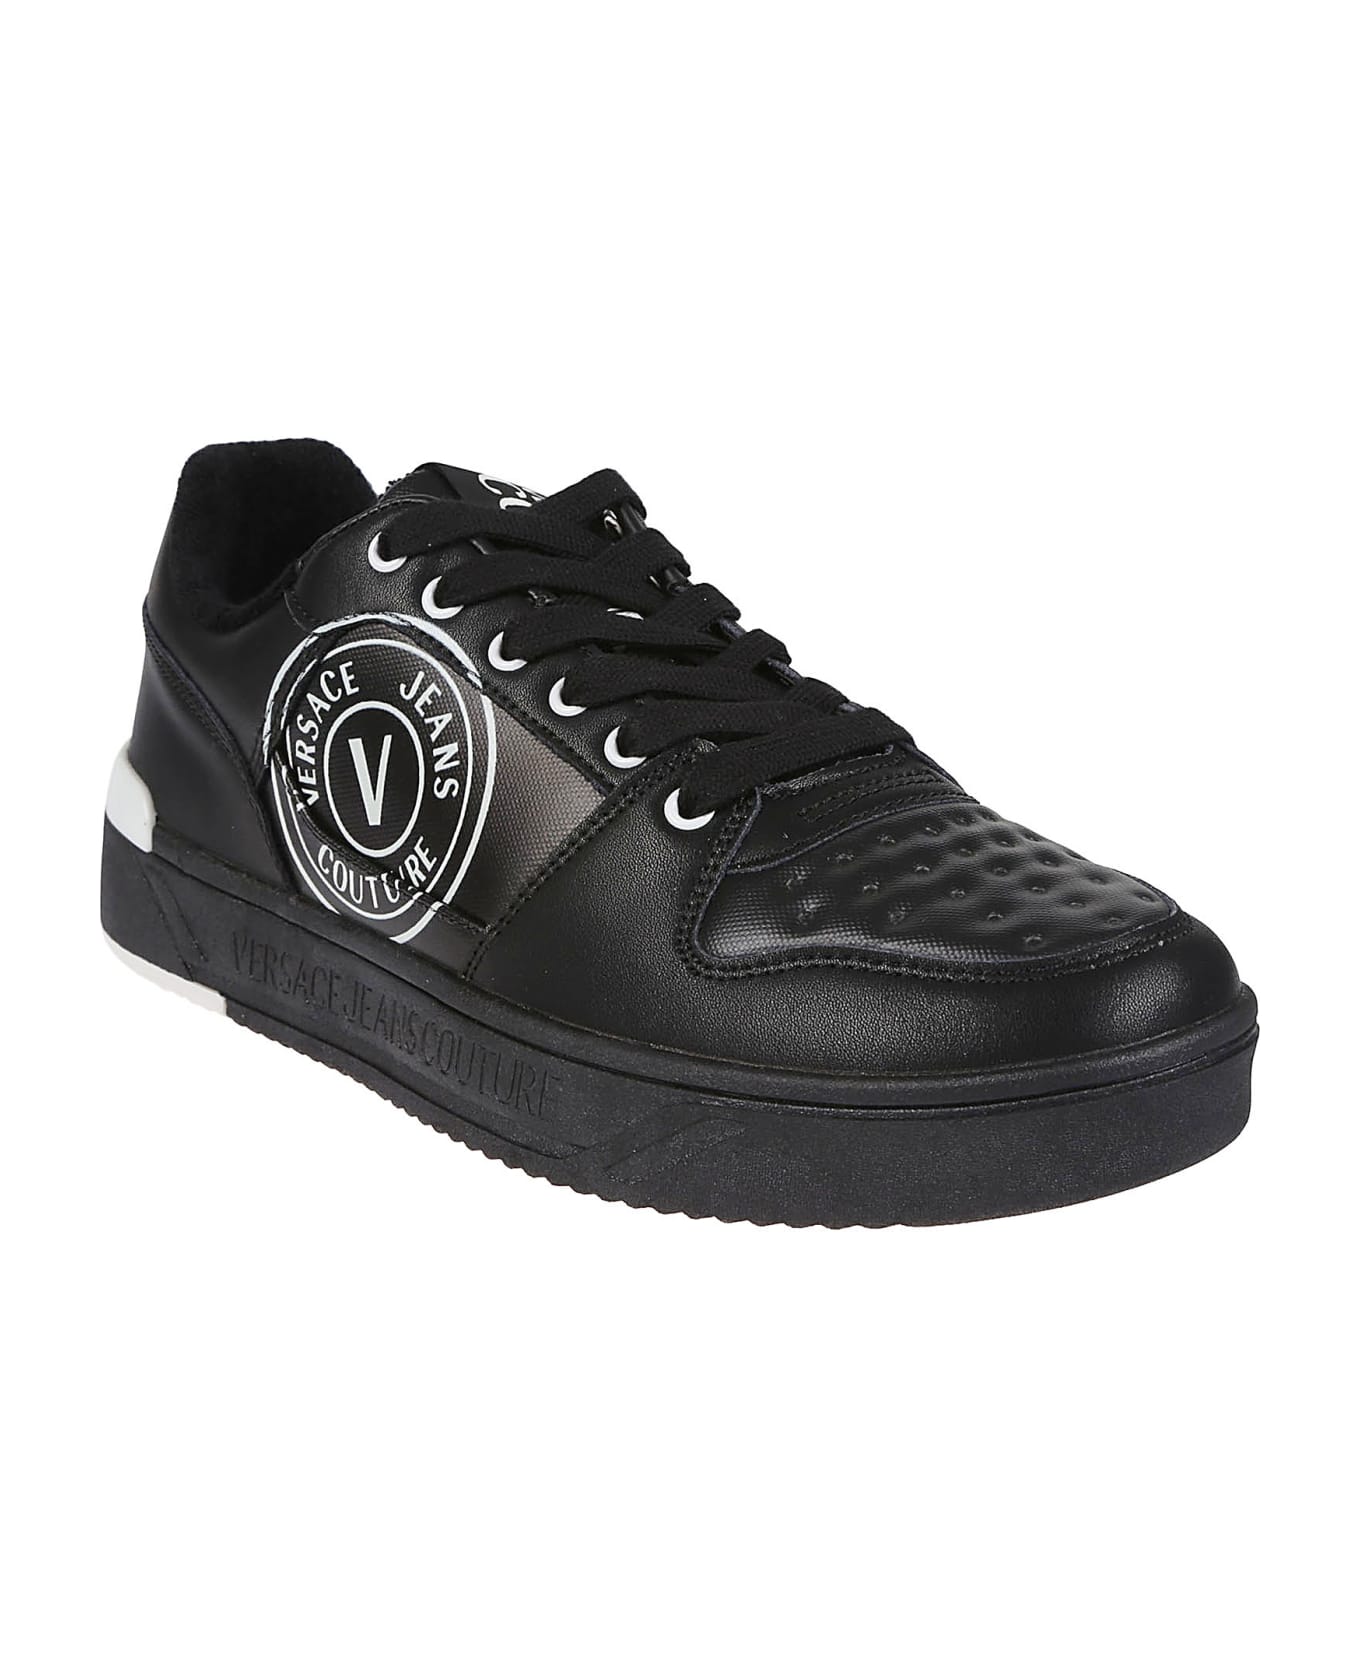 Versace Jeans Couture Starlight Sj1 Sneakers - Black